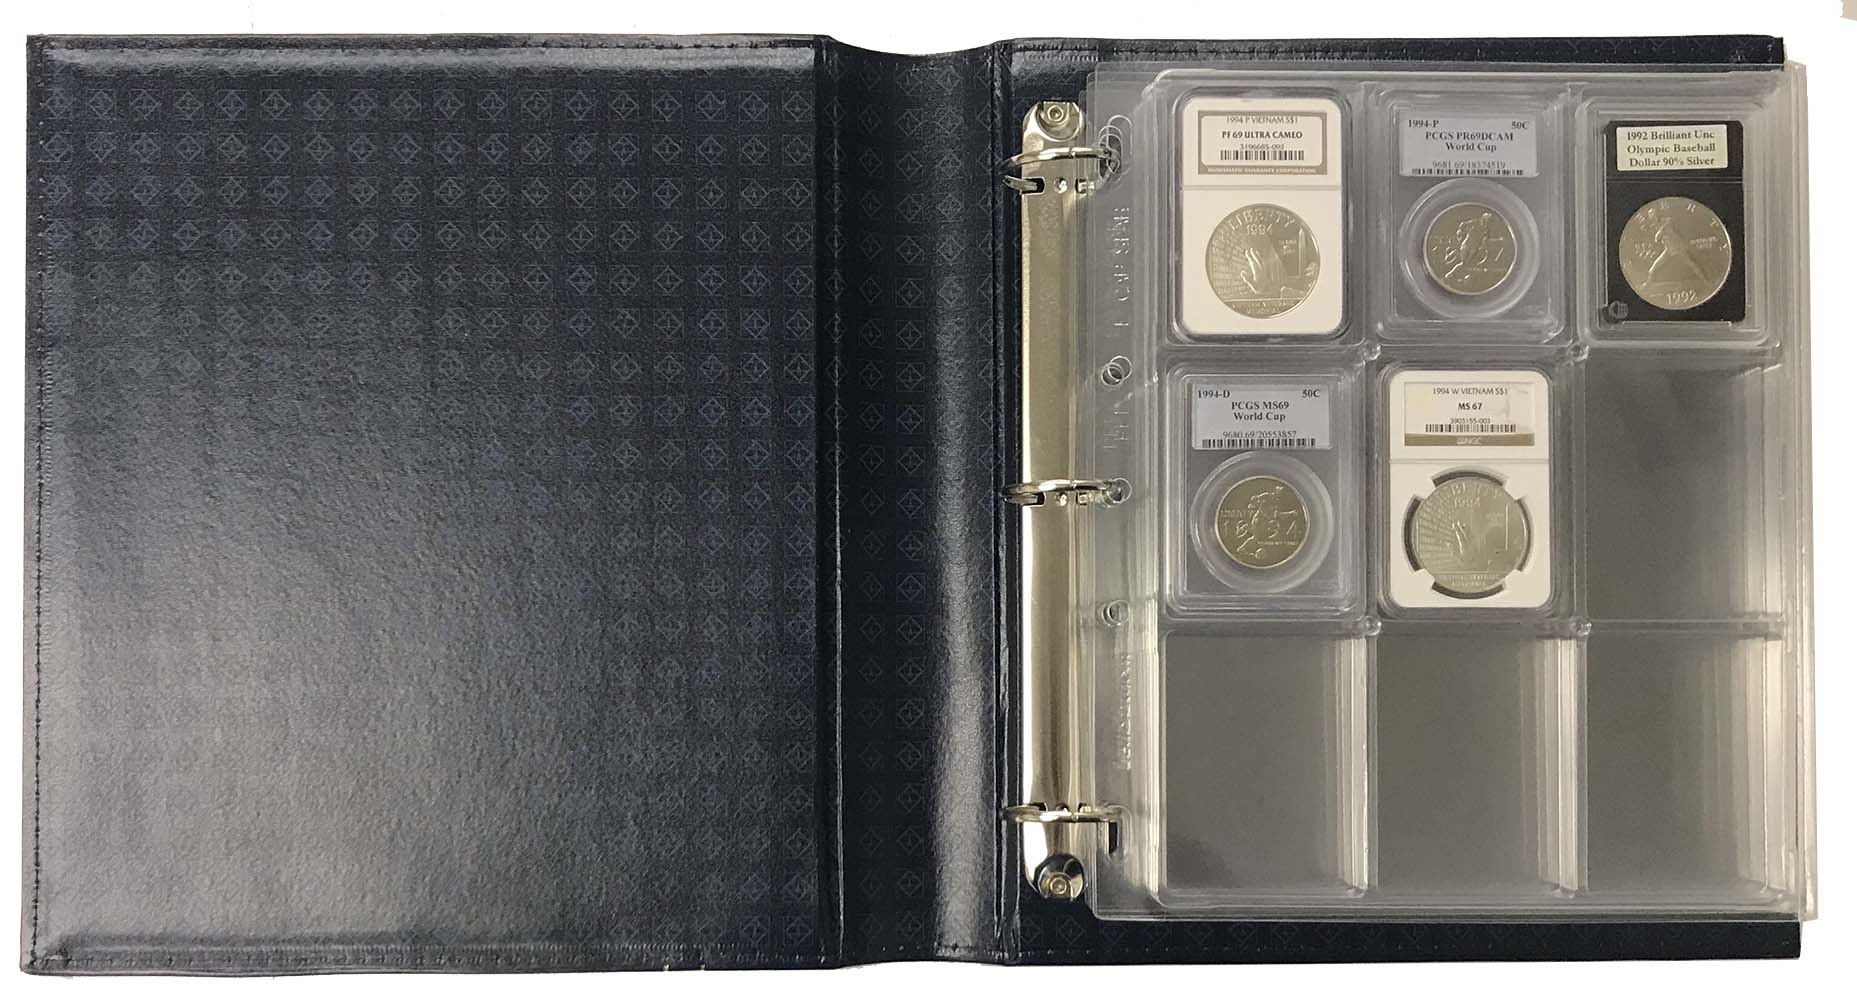 Lighthouse Classic Optima Coin Album With Slipcase & 10 Mixed Coin Pages BLUE 